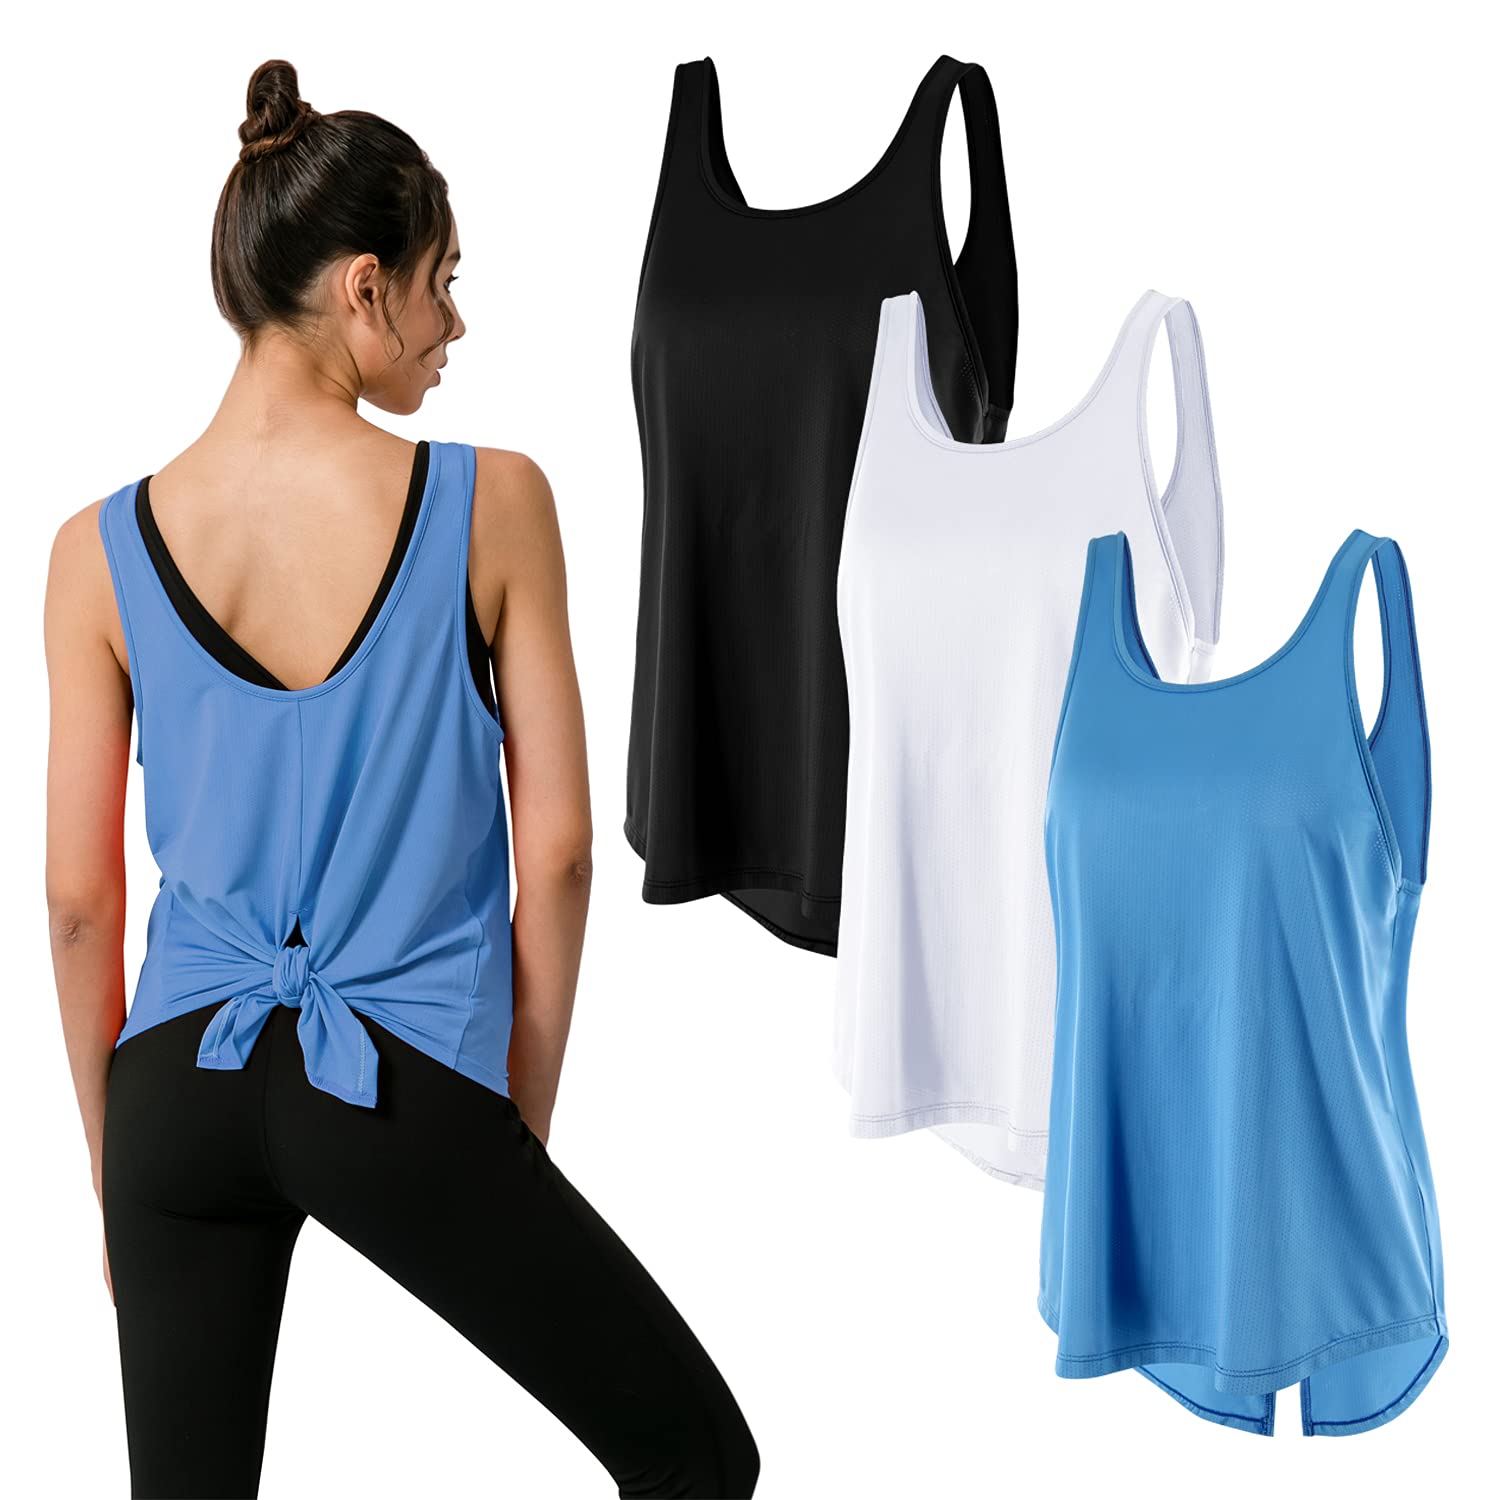  Shirts For Women Gym Yoga Tops Running Tee Workout